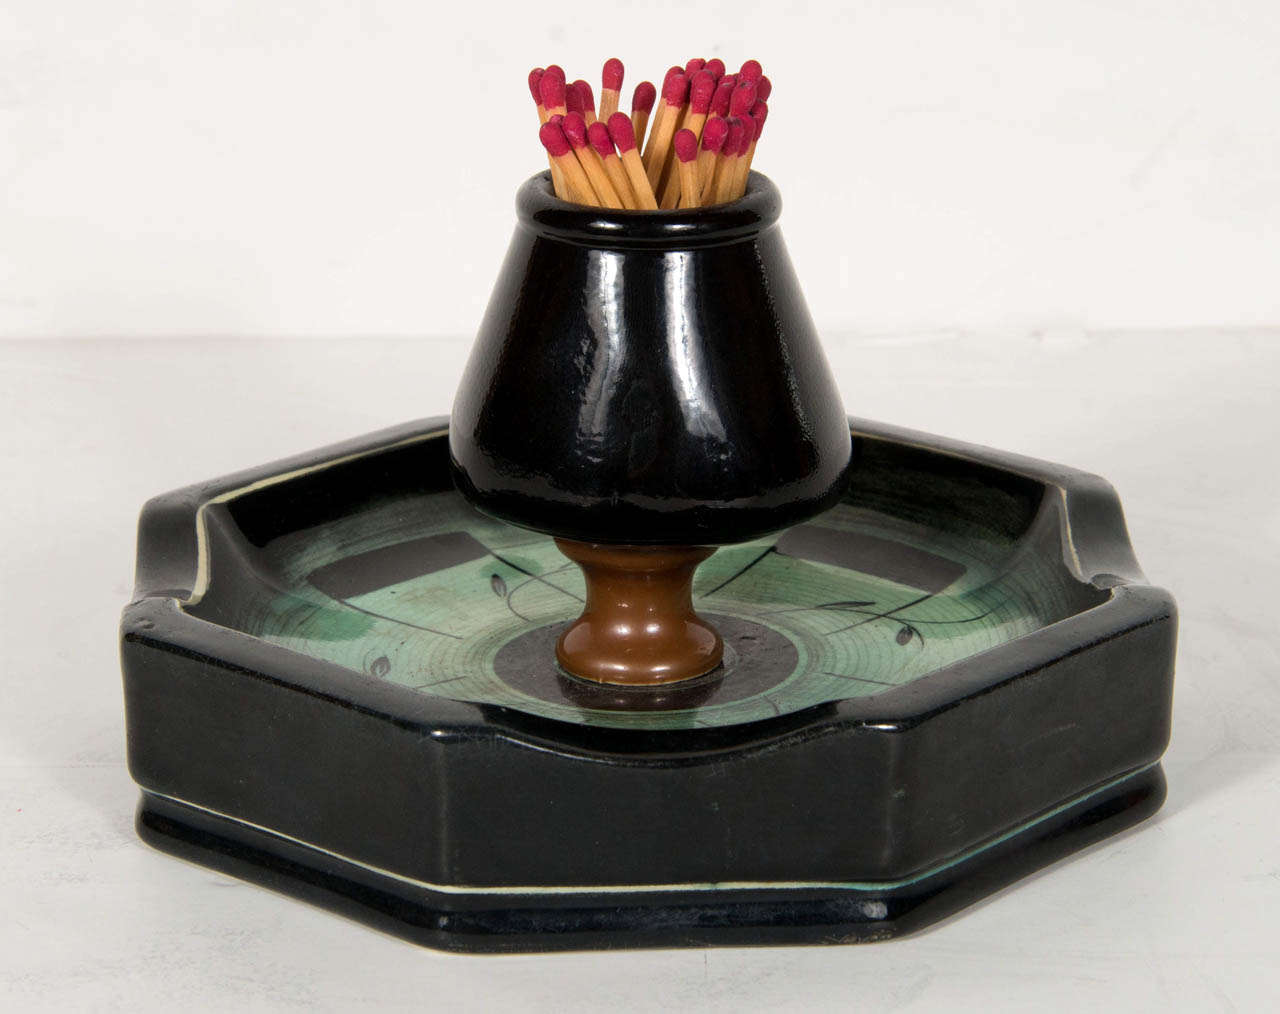 This unique match holder/ashtray by Ilse Claussen of Sweden in aqua blue green glaze has stylized hand painted Art Deco detailing. It has an octagonal shape with a central bowl in which matches are stored. It's signed on the bottom with Ilse